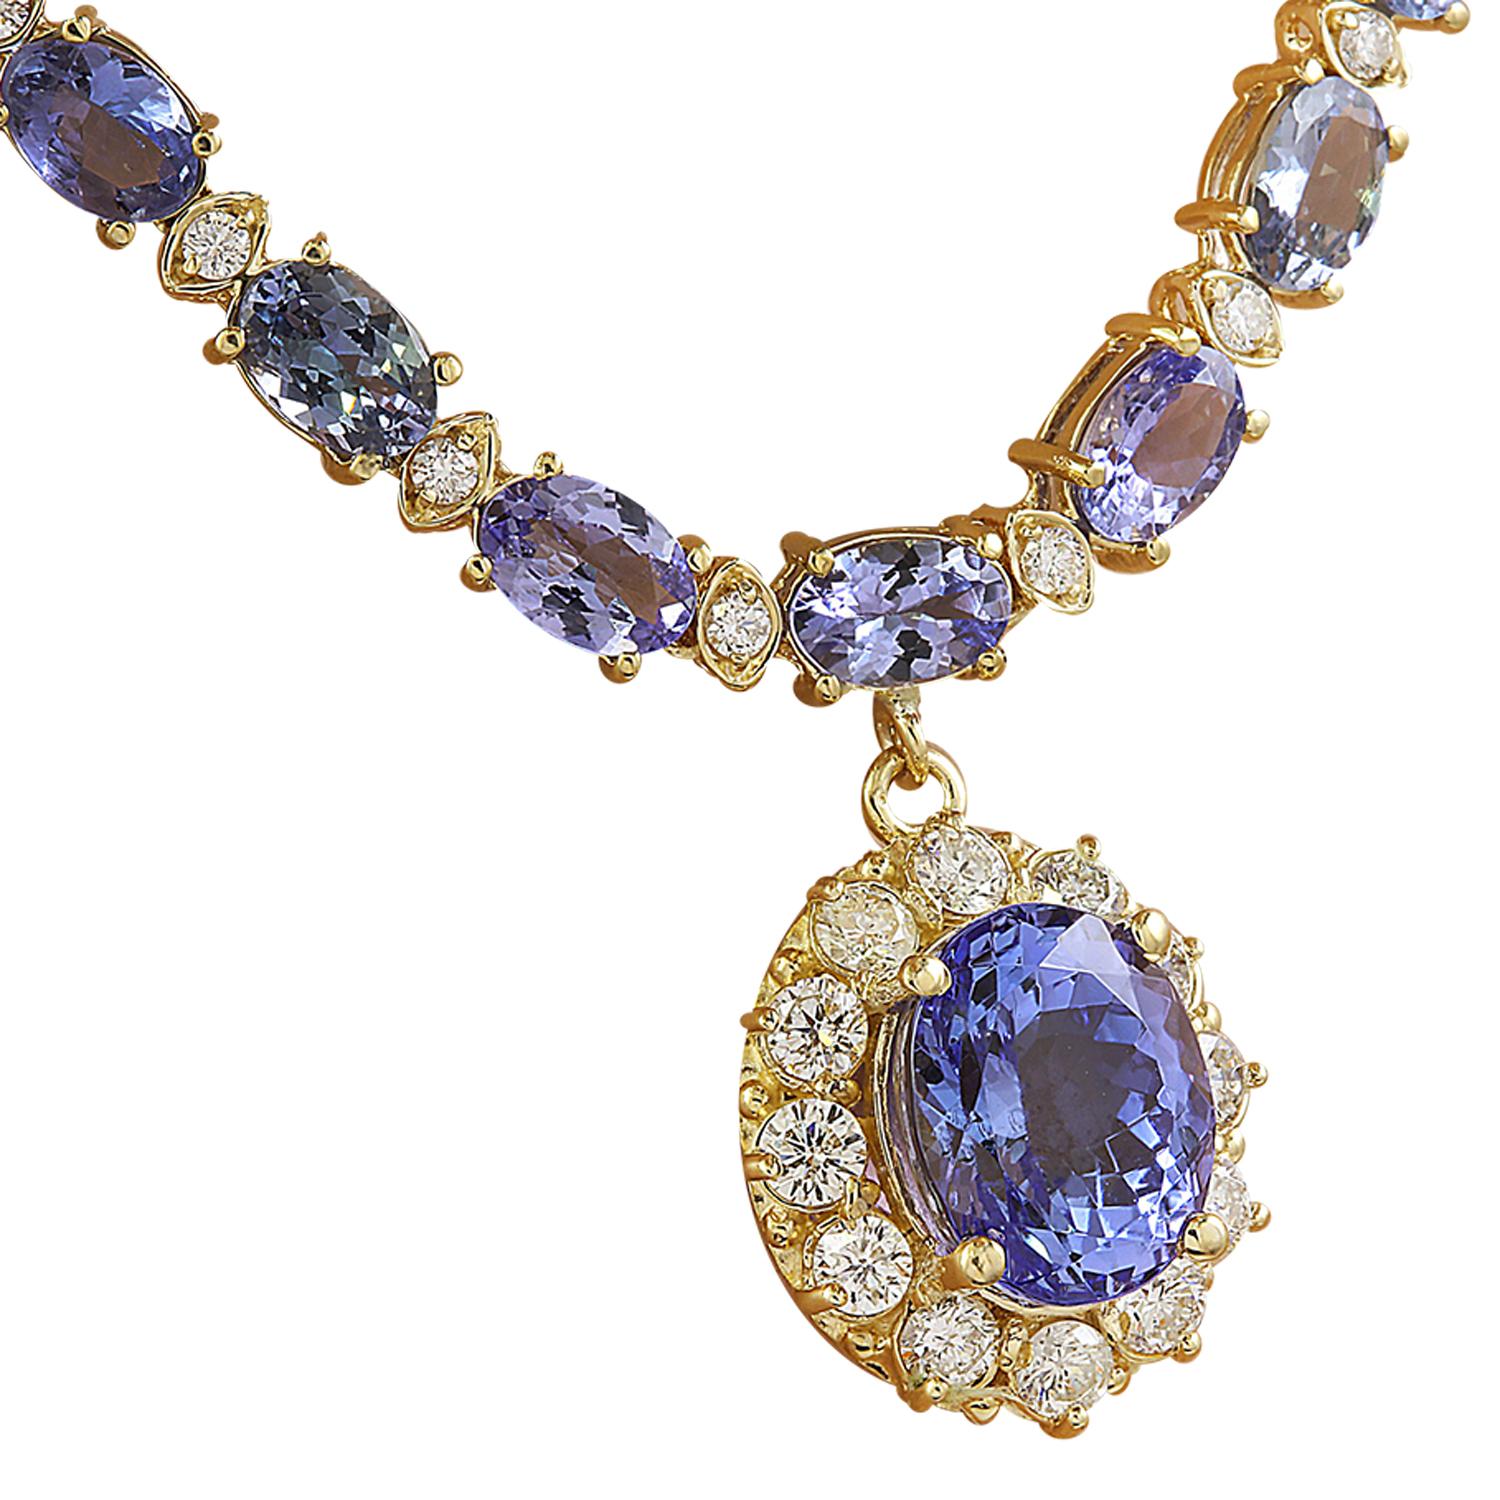 42.87 Carat Natural Tanzanite 14 Karat Solid Yellow Gold Diamond Necklace
Stamped: 14K
Total Necklace Weight: 27.1 Grams
Necklace Length: 18.5 Inches
Center Tanzanite Weight: 4.67 Carat (10.00x8.00 Millimeters)
Side Tanzanite Weight 34.40 Carat